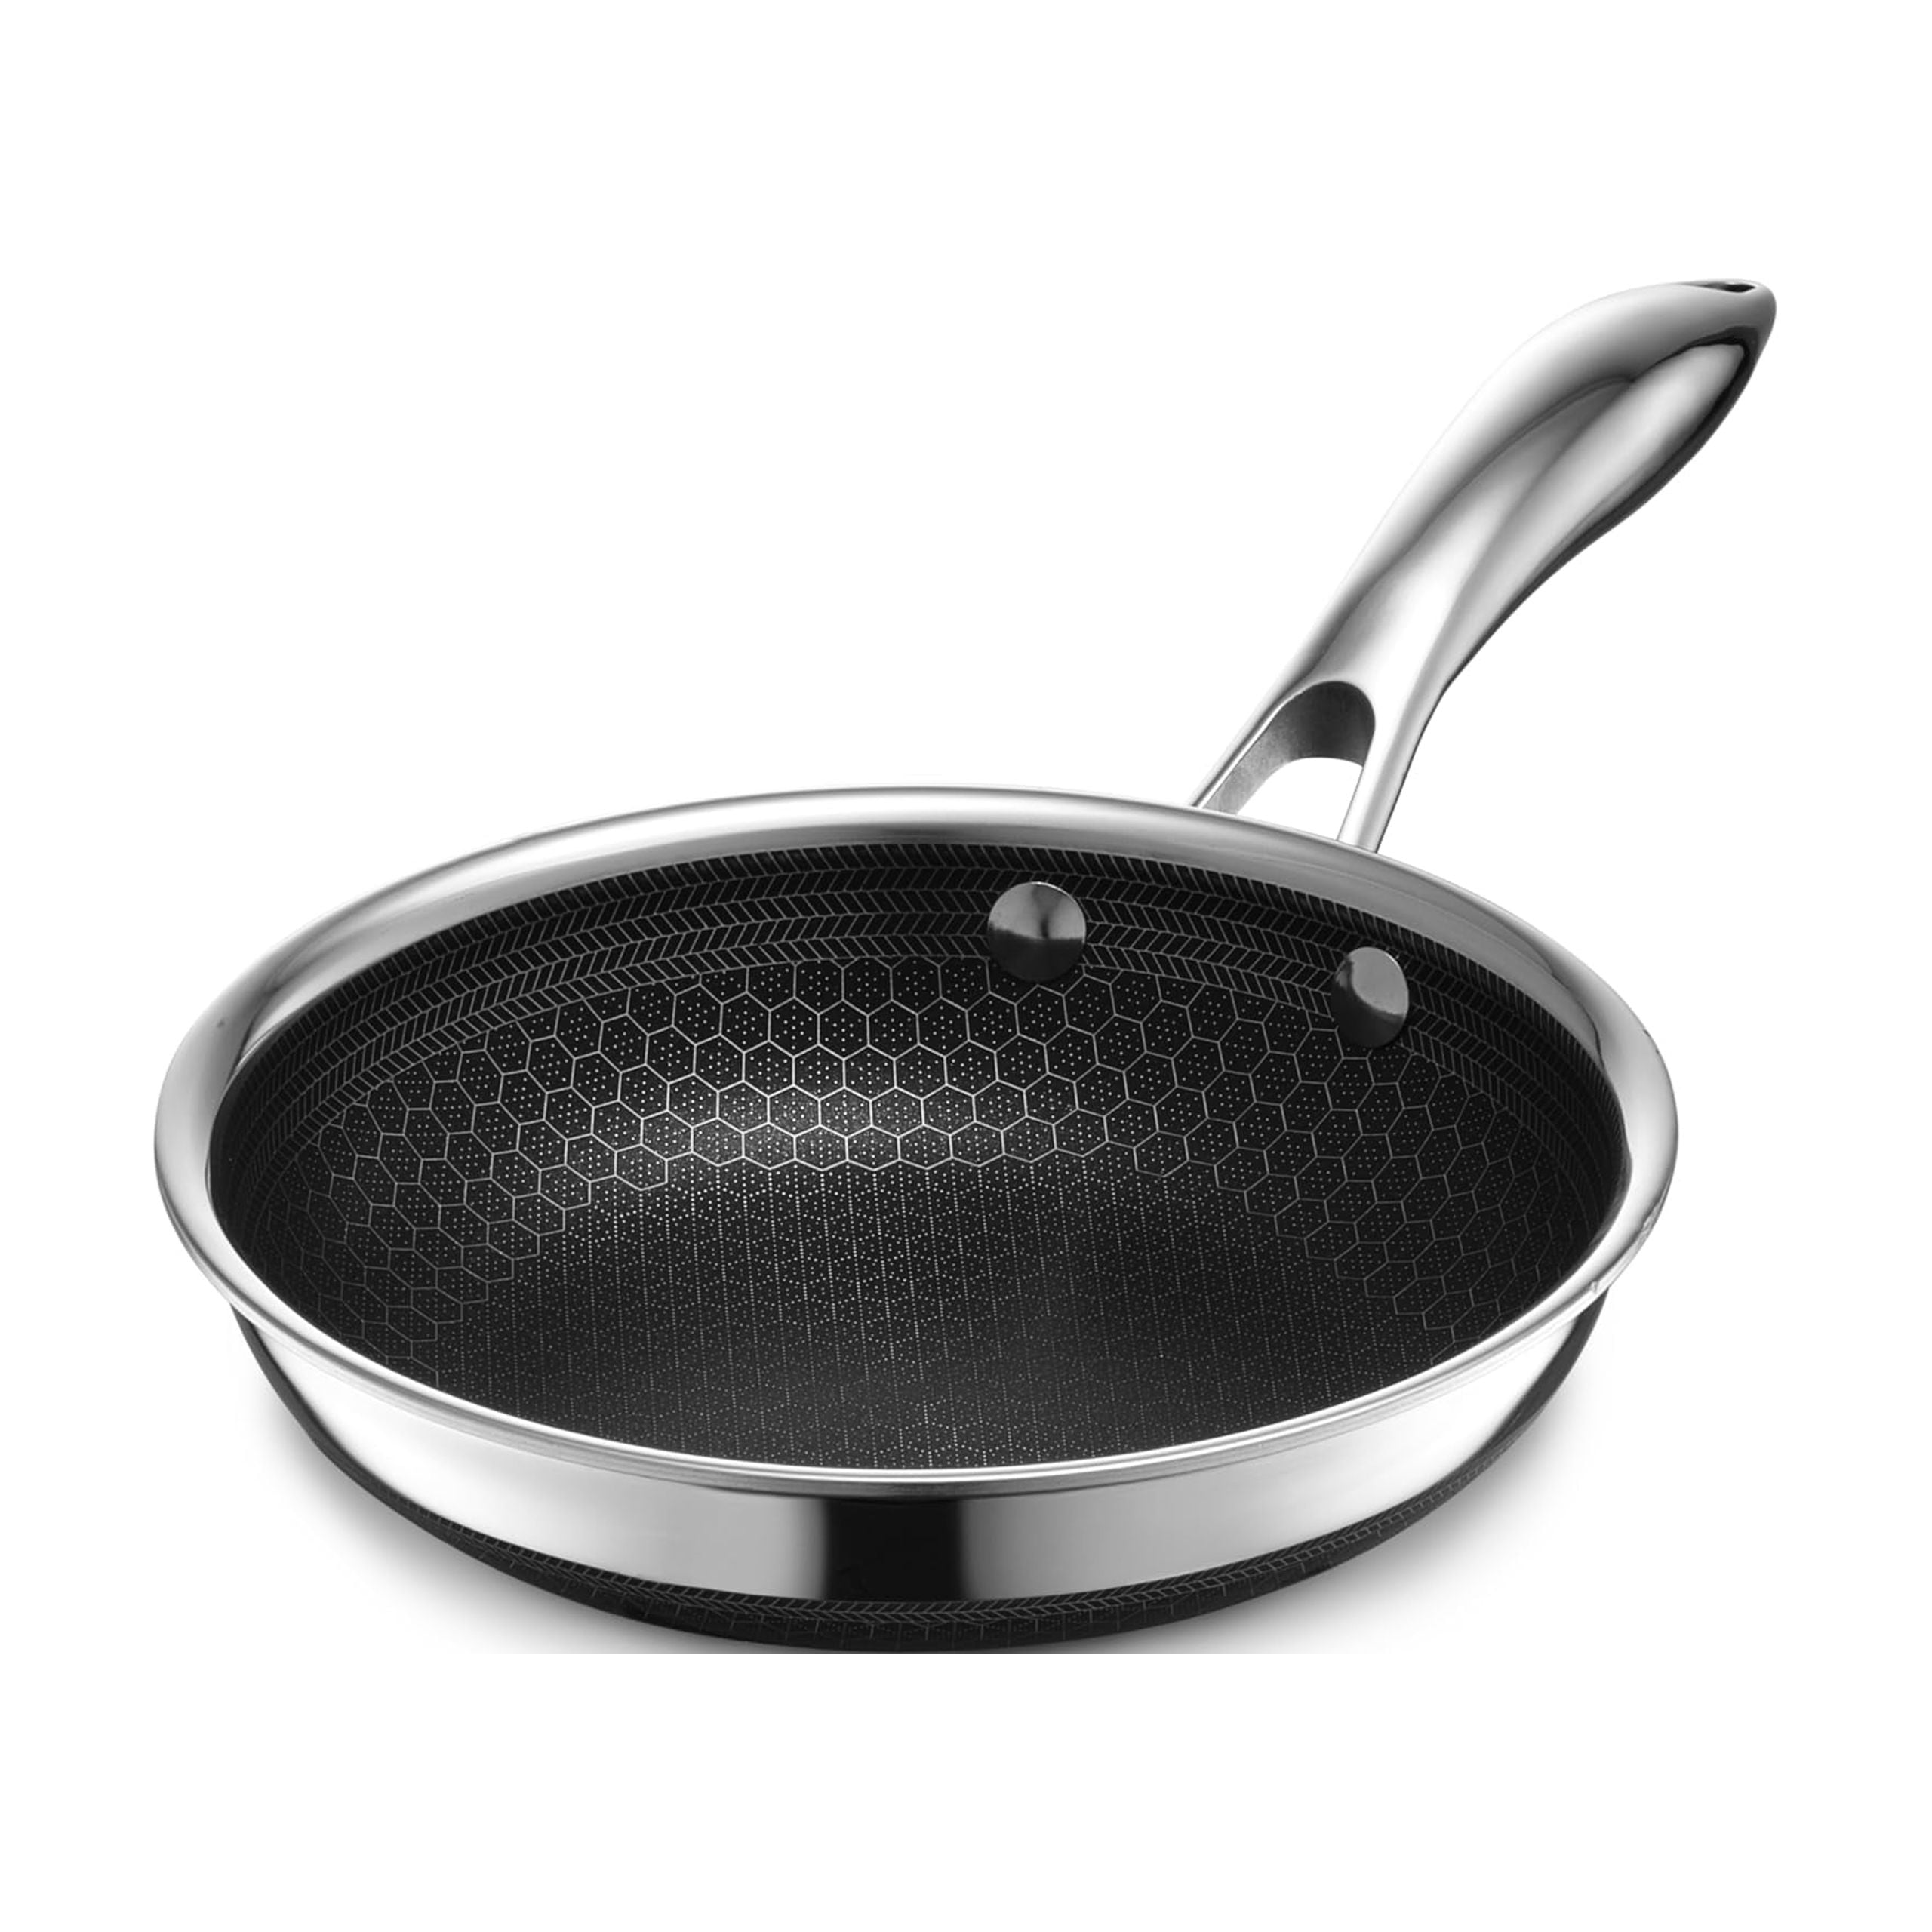 THE ROCK by Starfrit Fry Pan with Bakelite Handle (10-In.)  (Model-030908-006